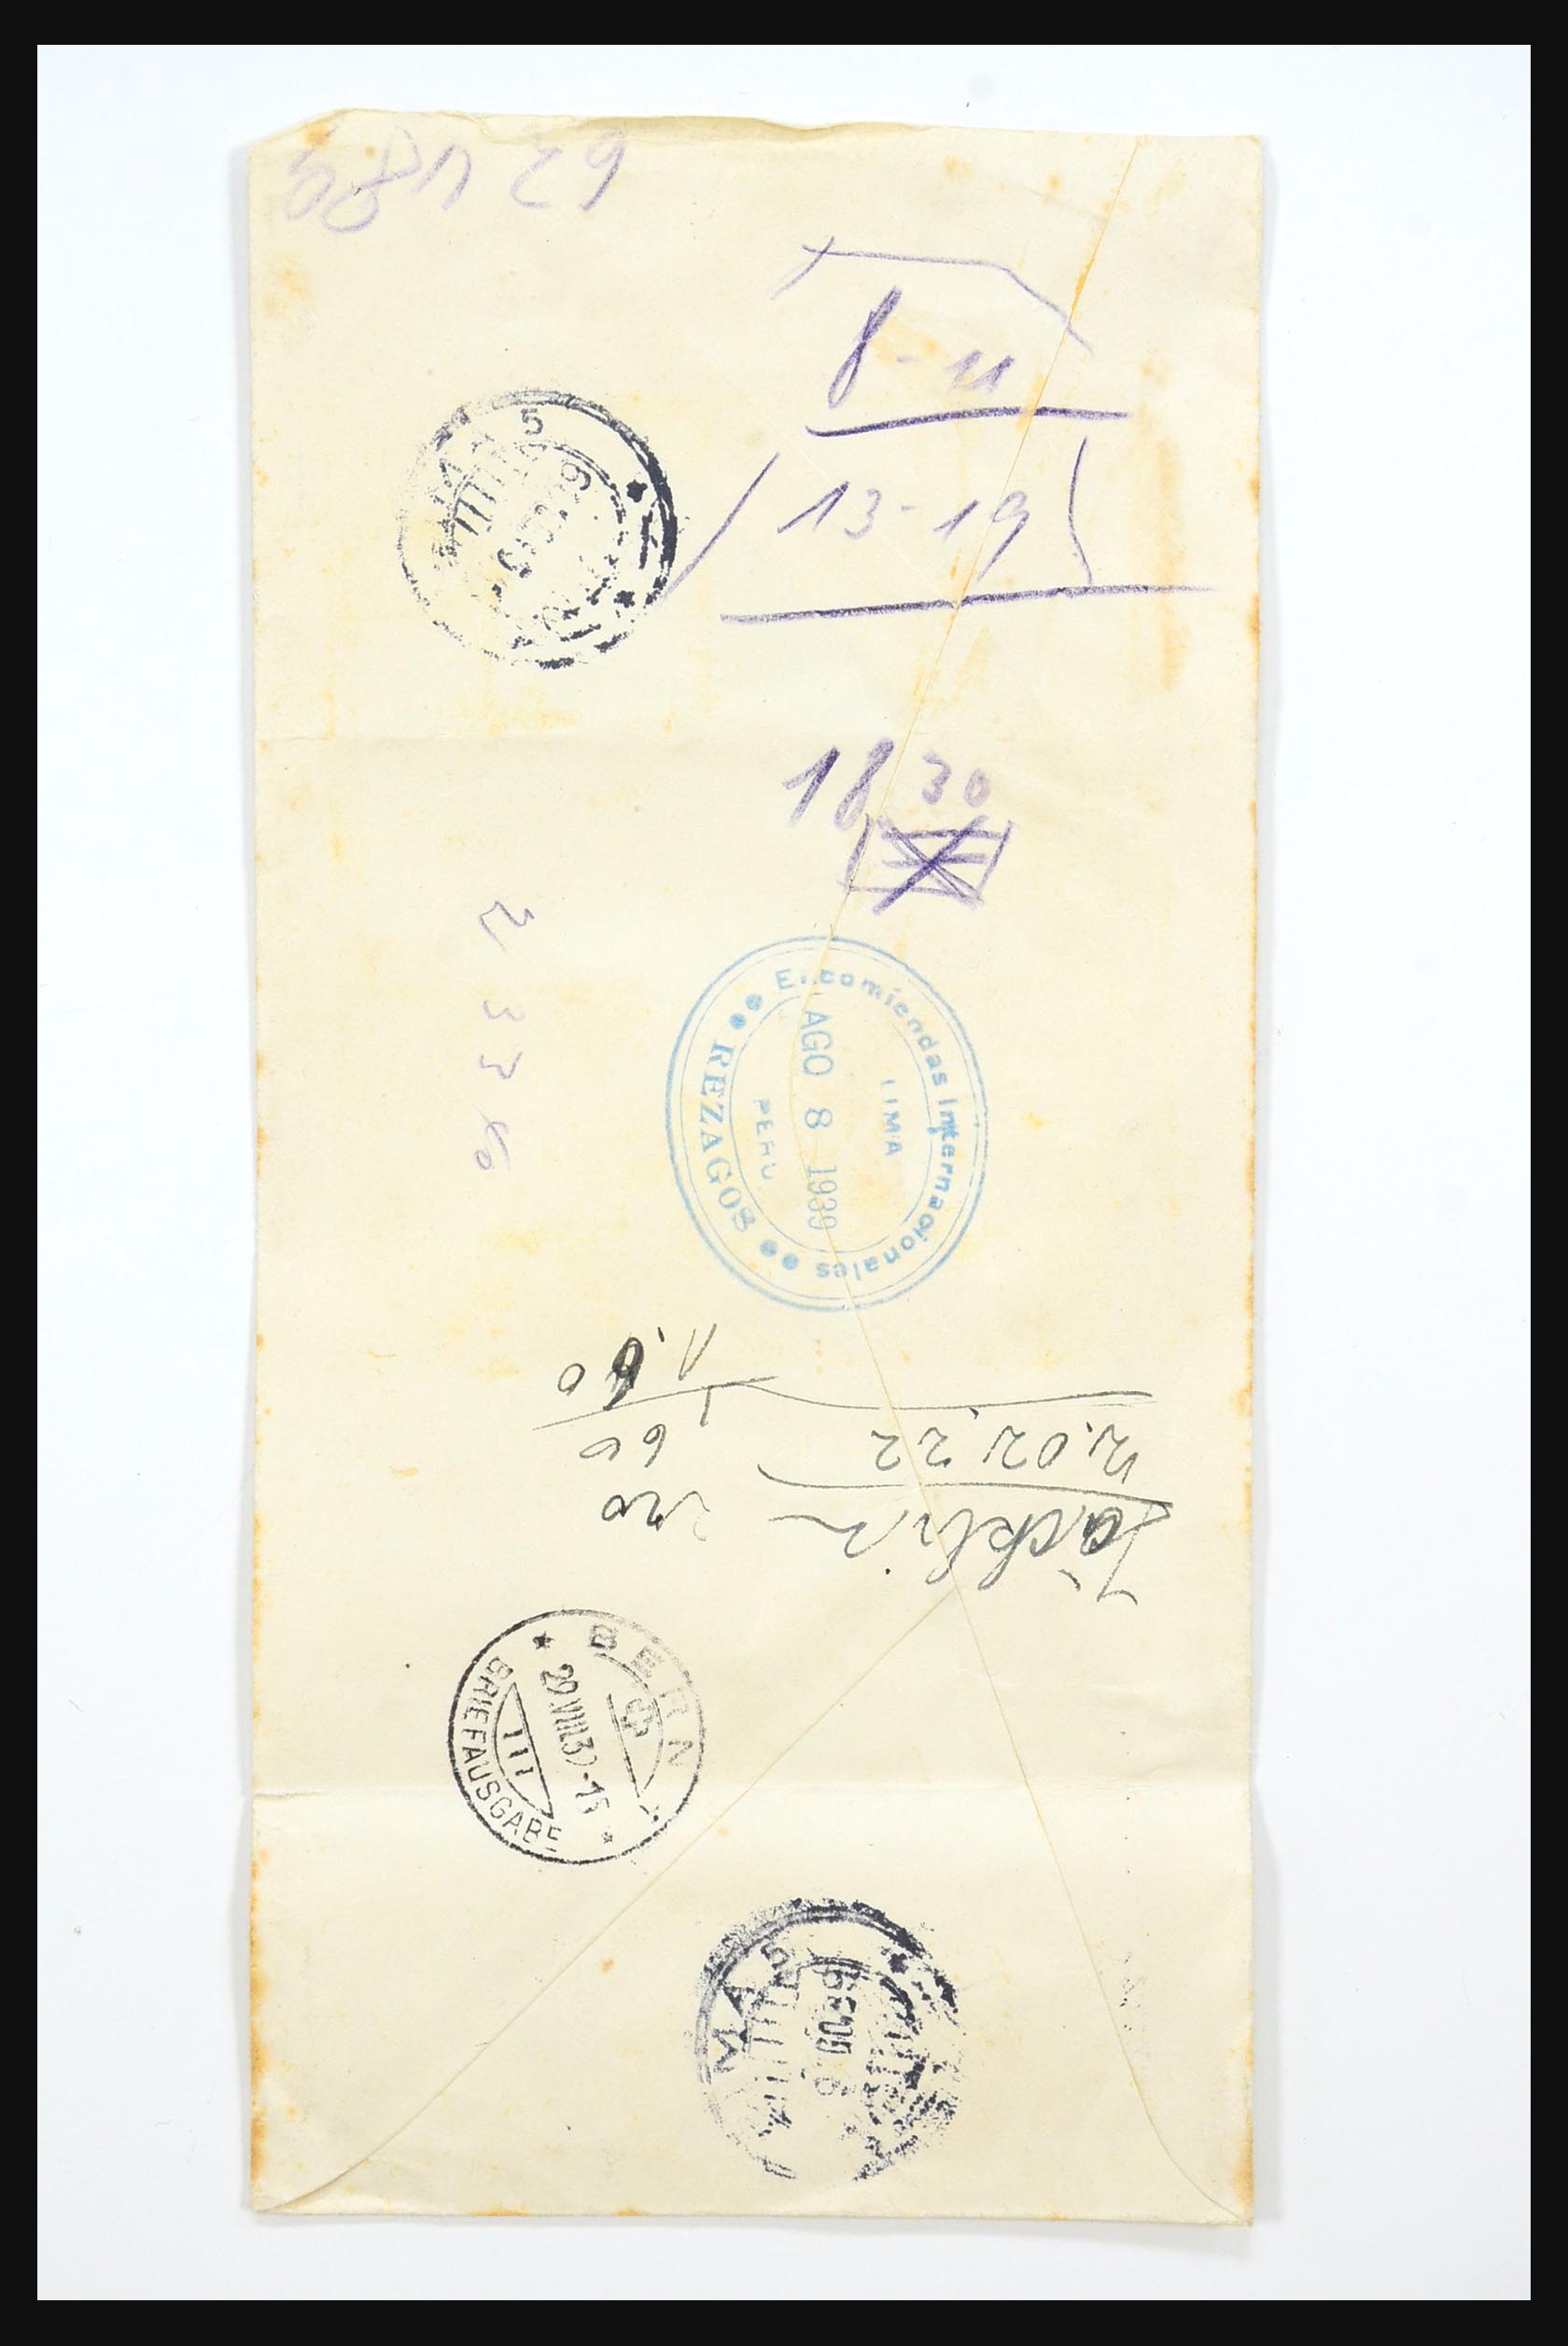 31359 0045 - 31359 France and Colonies covers 1770-1960.